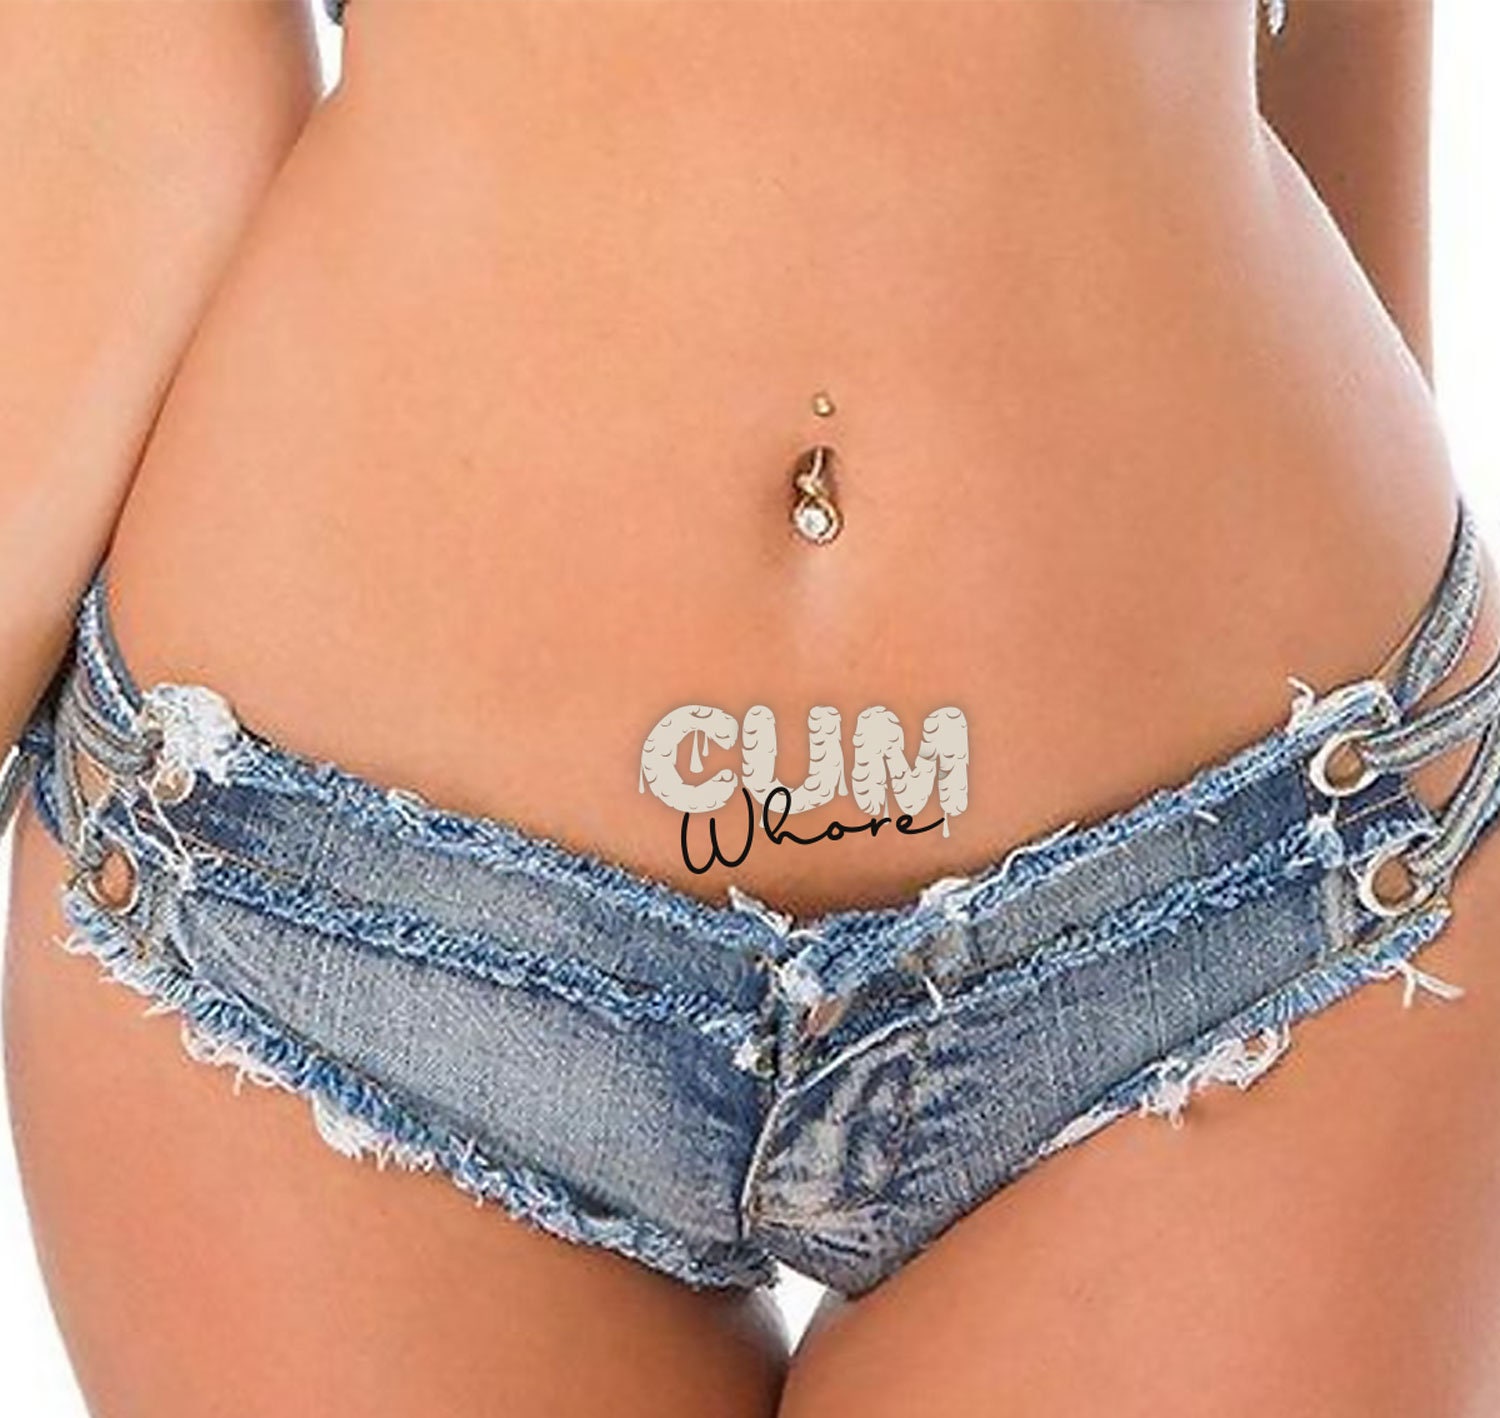 3x Cum Adult Temporary Tattoos Tramp Stamps Ddlg Etsy Uk